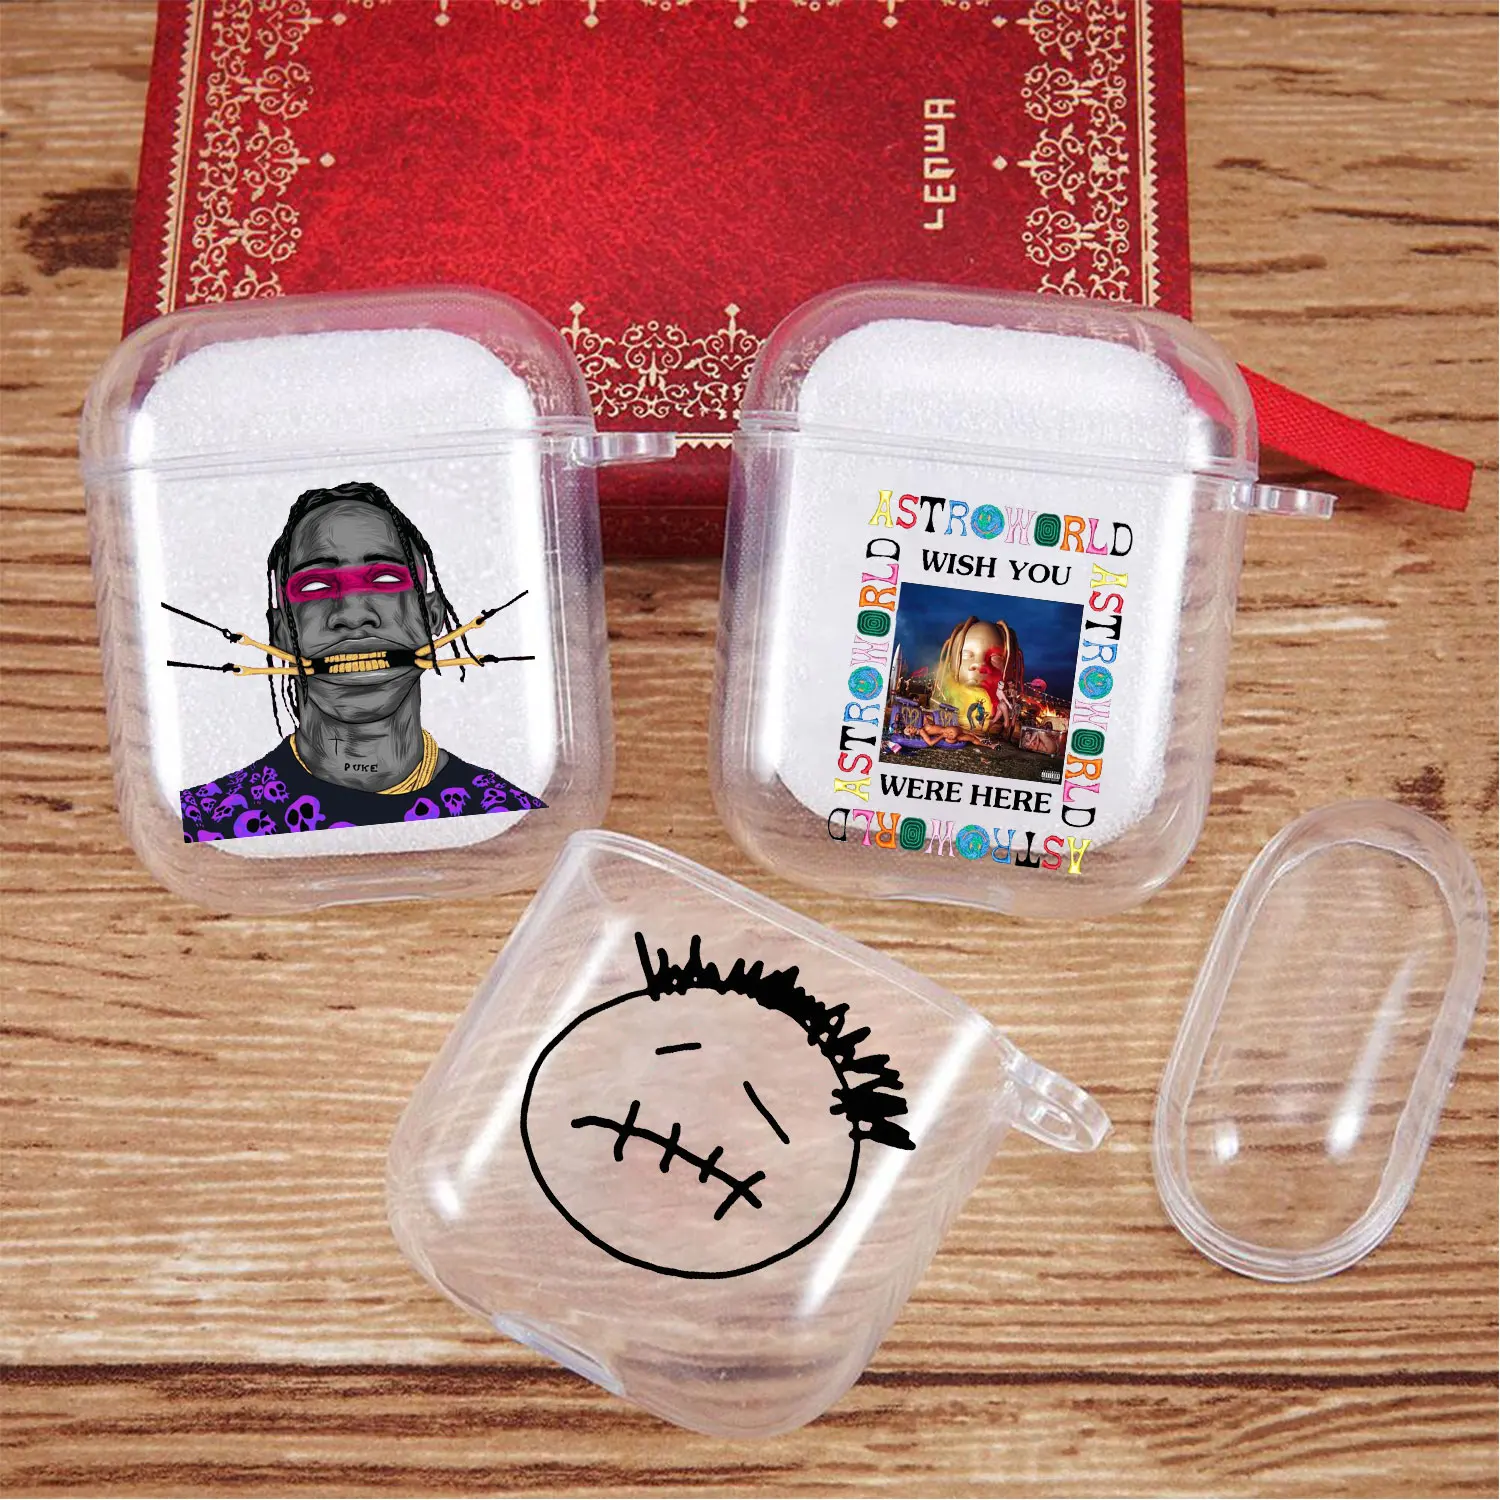 For Airpods Case Boy Basketball Soft Silicone Earphone Cases For